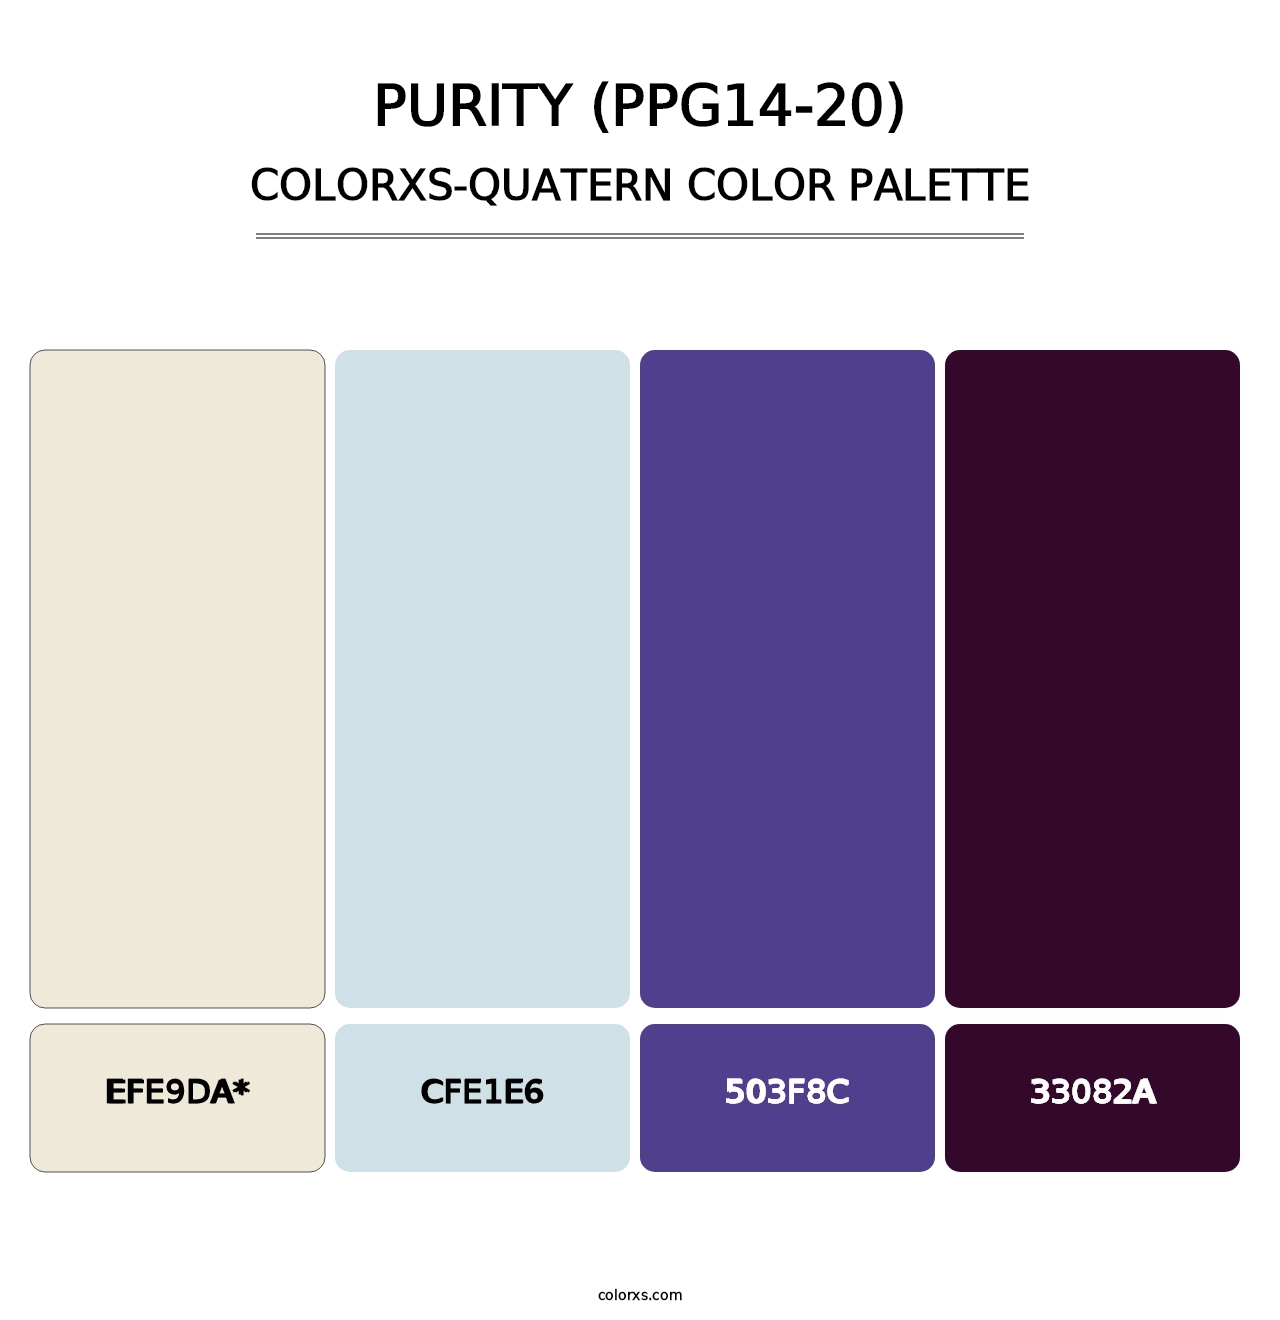 Purity (PPG14-20) - Colorxs Quatern Palette